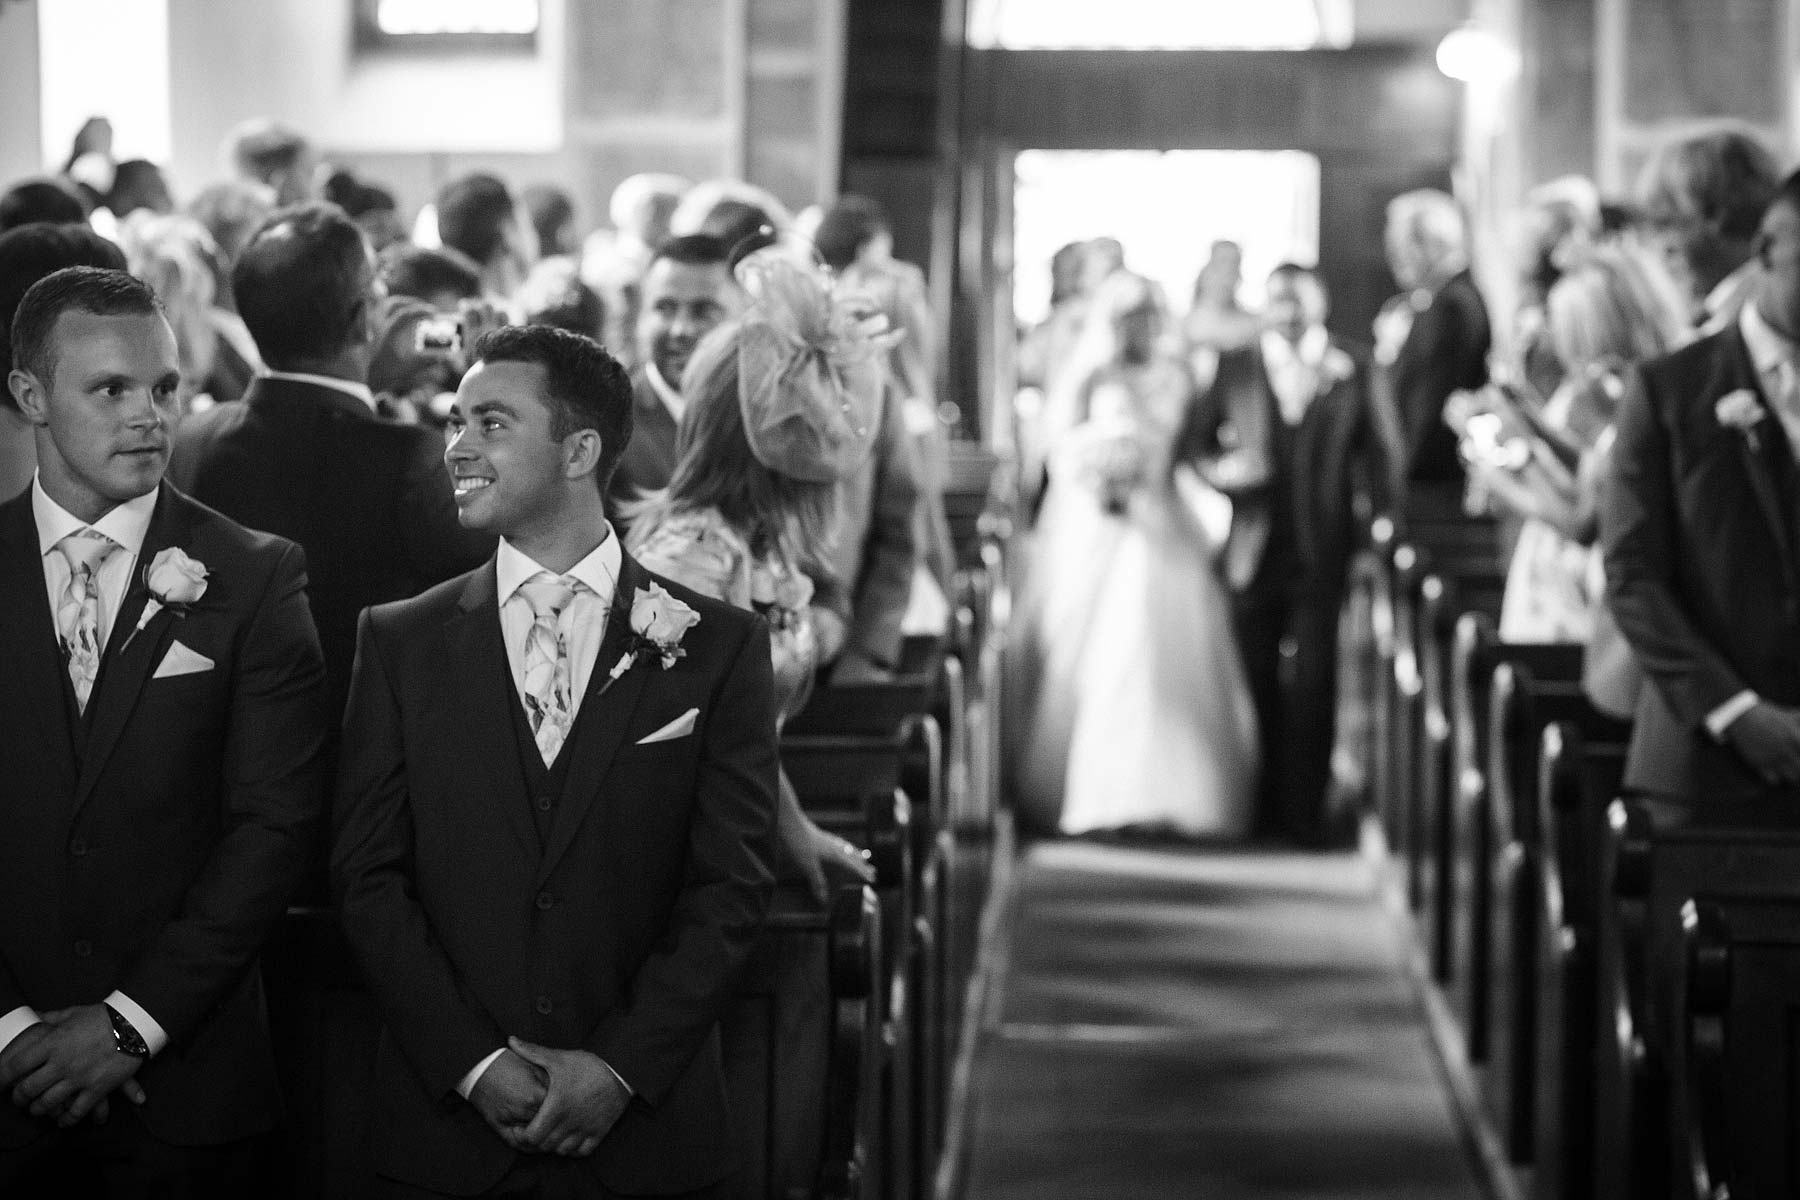 Beautiful reactions and glimpses between couple during wedding ceremony at St Andrews Church Weston Park in Staffordshire by Documentary Wedding Photographer Stuart James